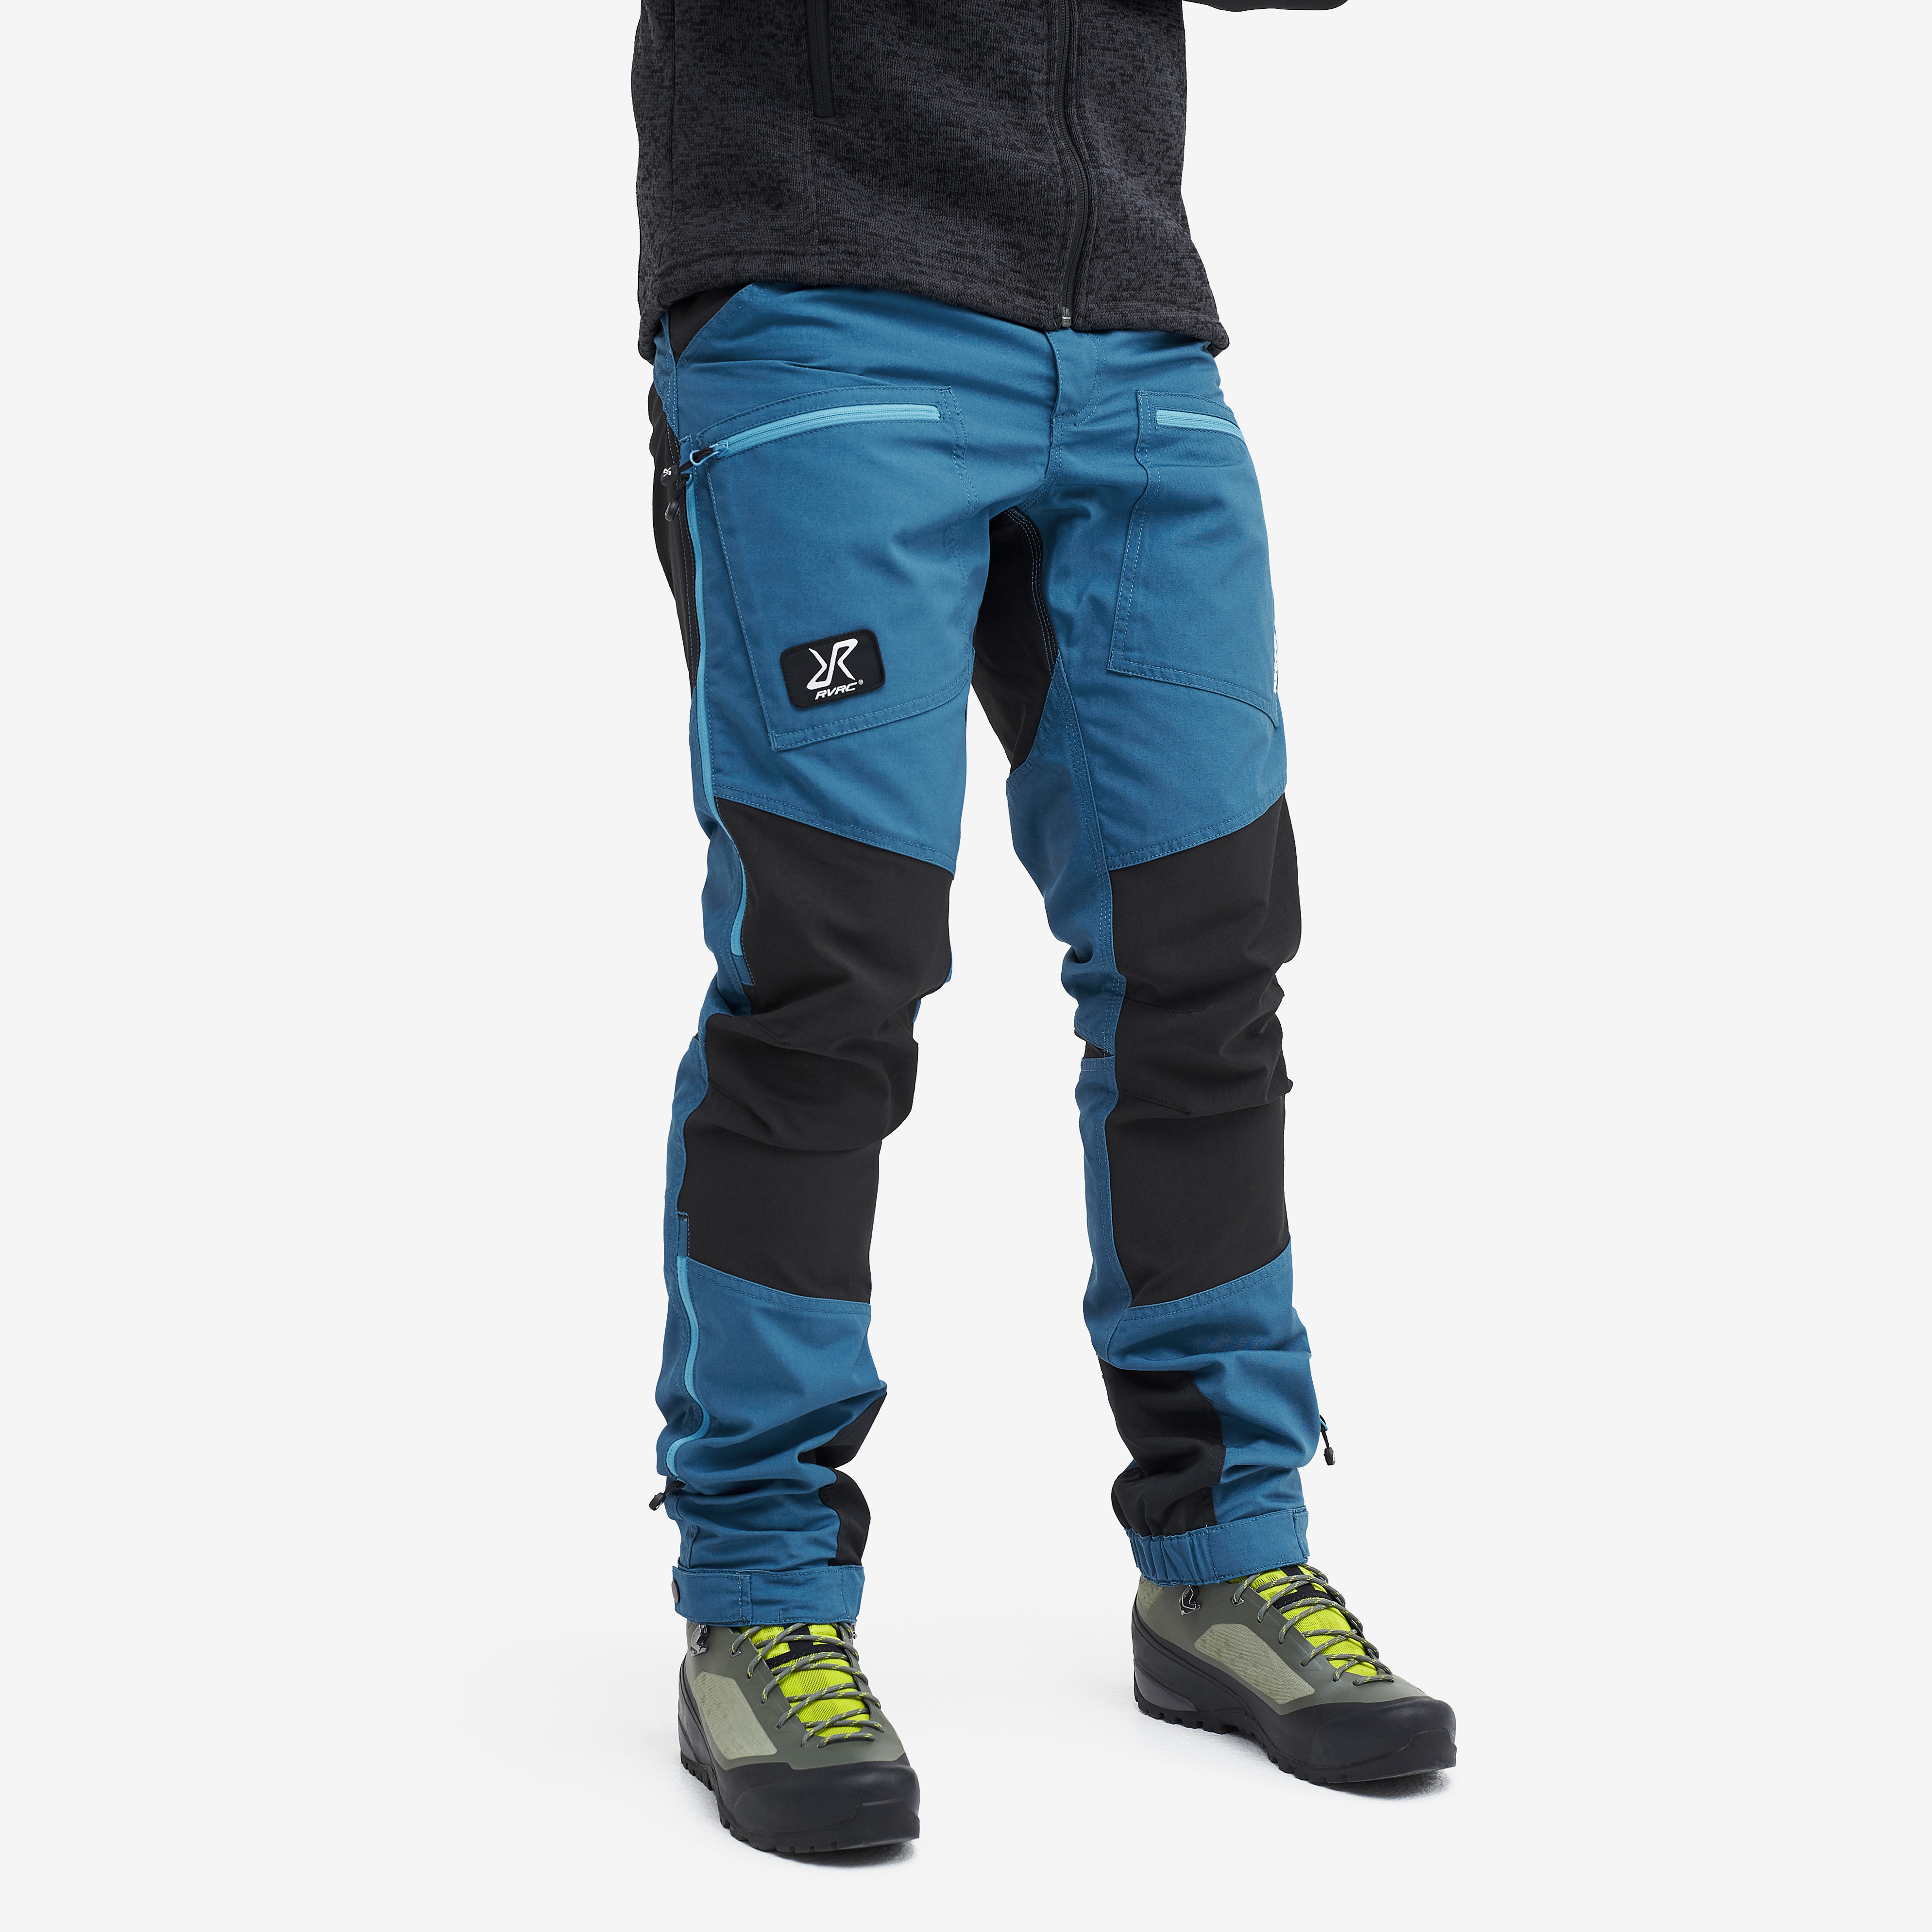 Nordwand Pro Rescue hiking pants for men in blue